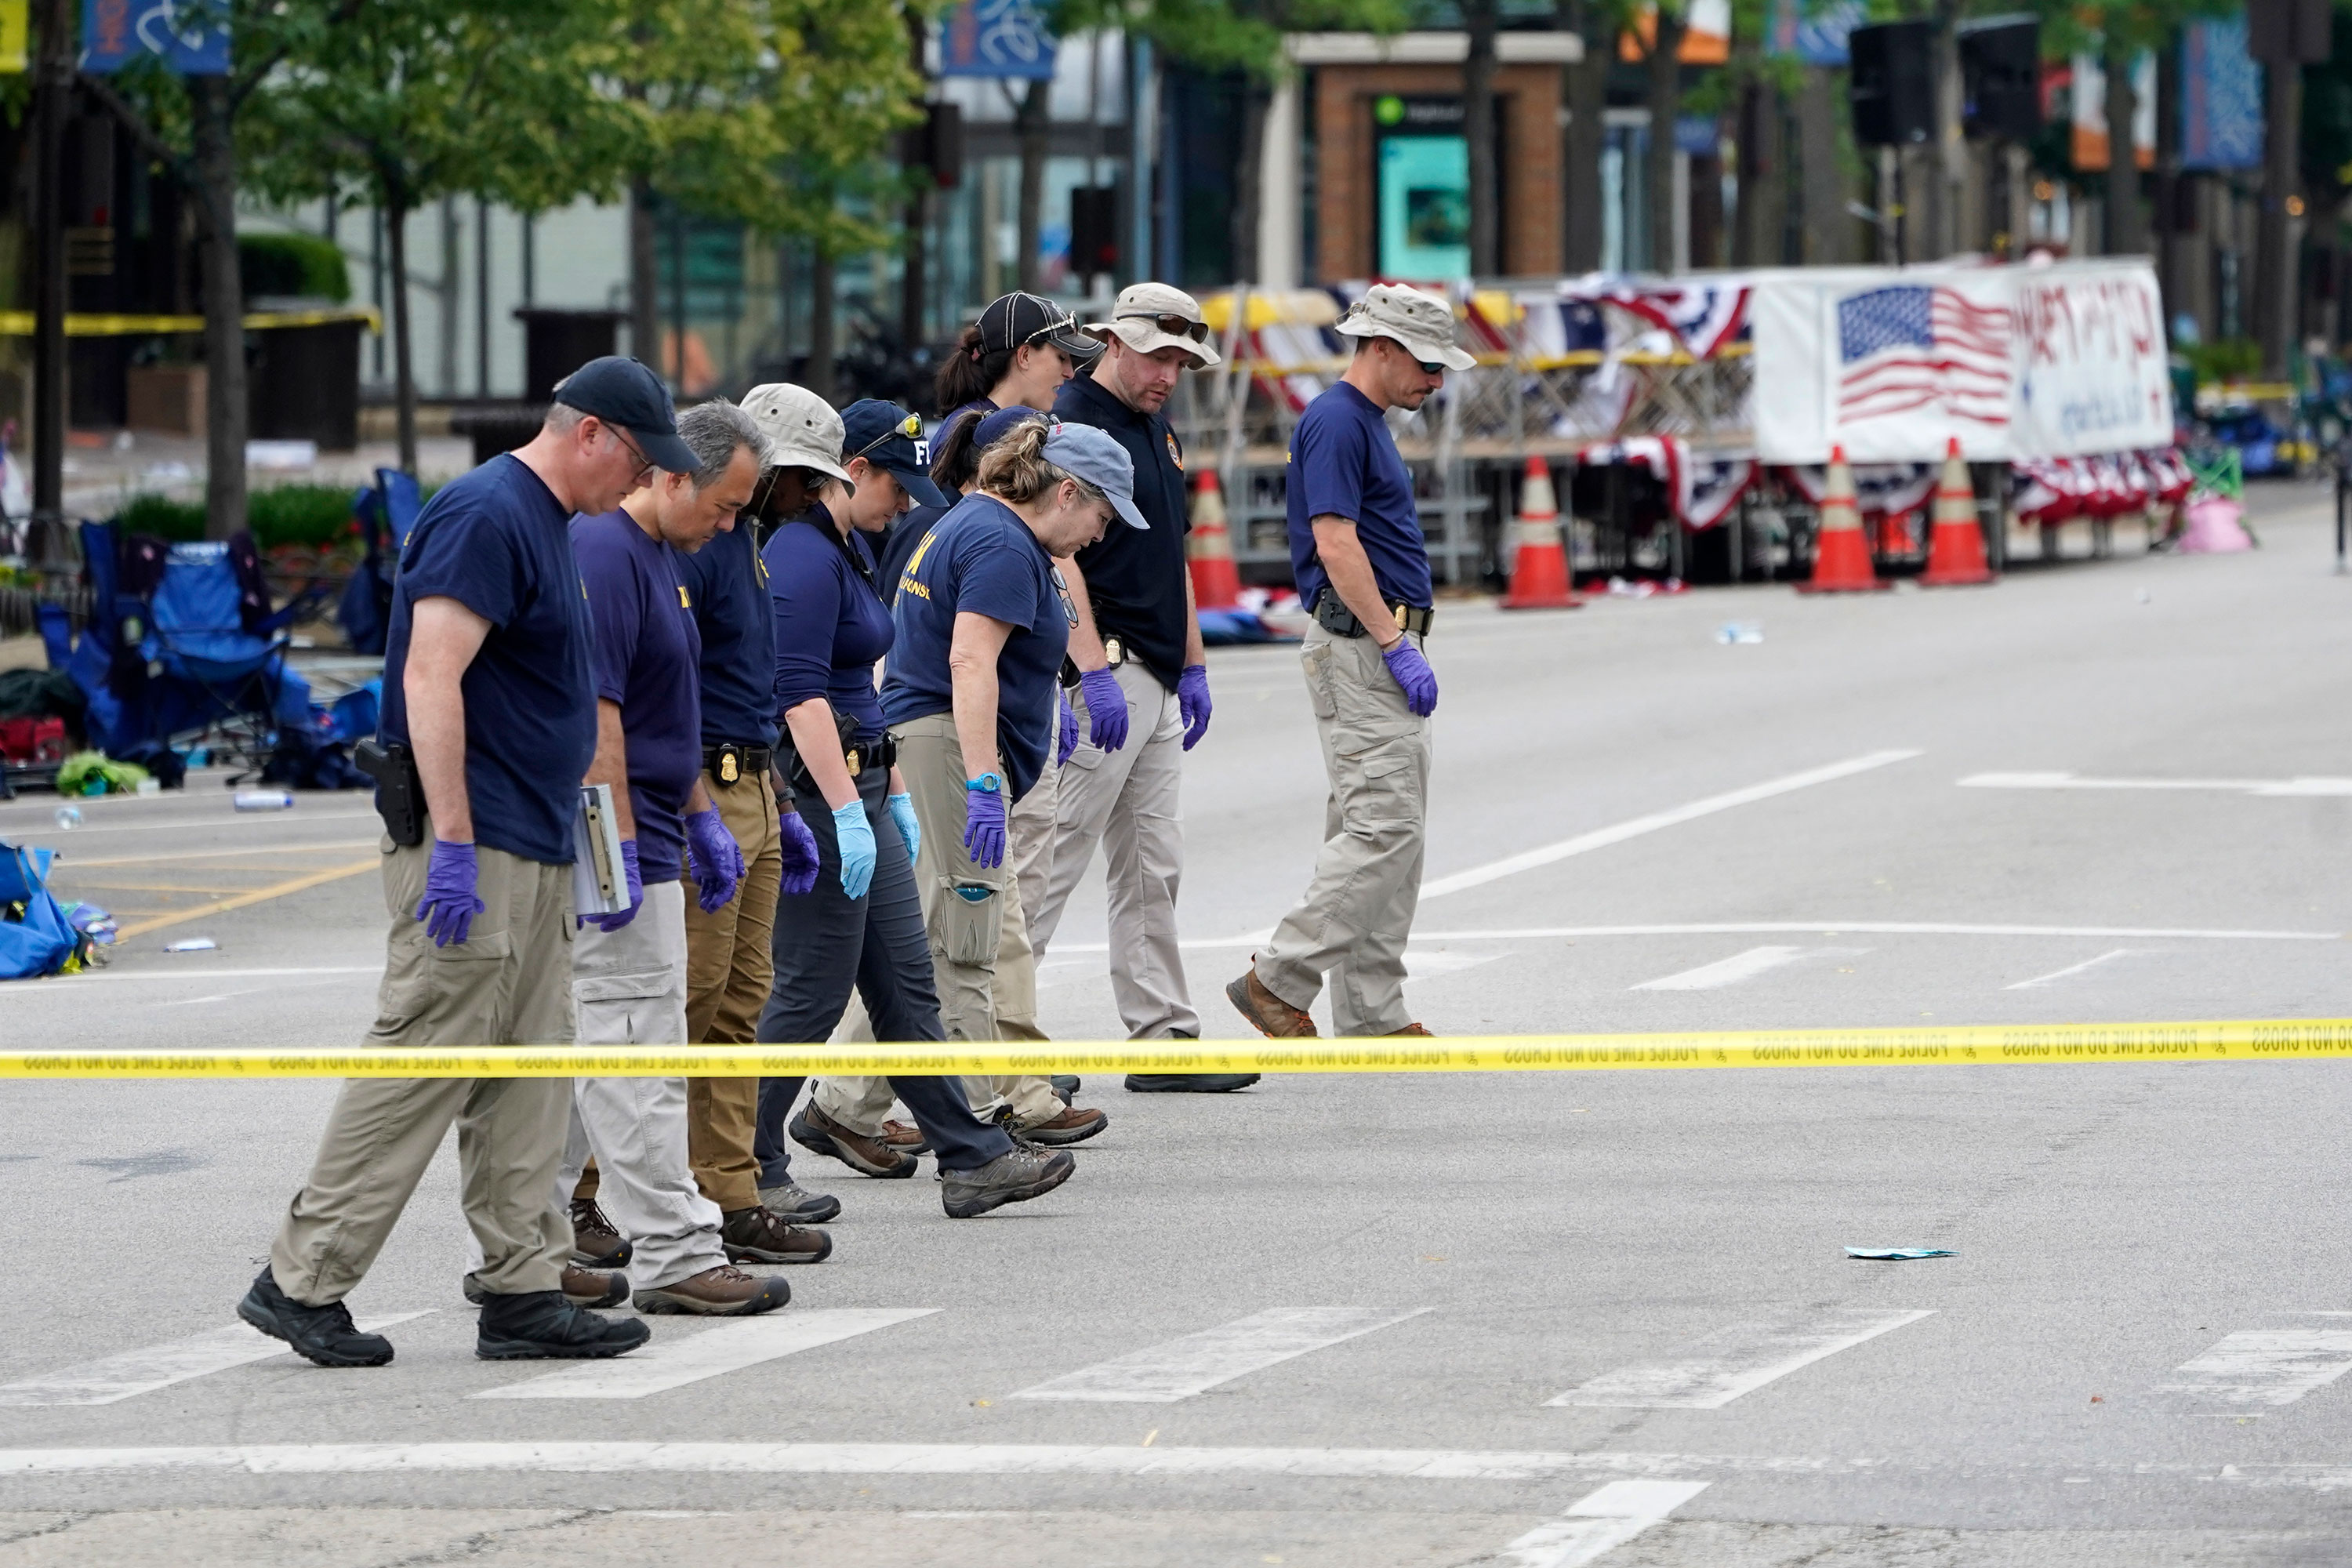 Members of the FBI walk the scene one day after the shooting in Highland Park, Illinois, on Tuesday.